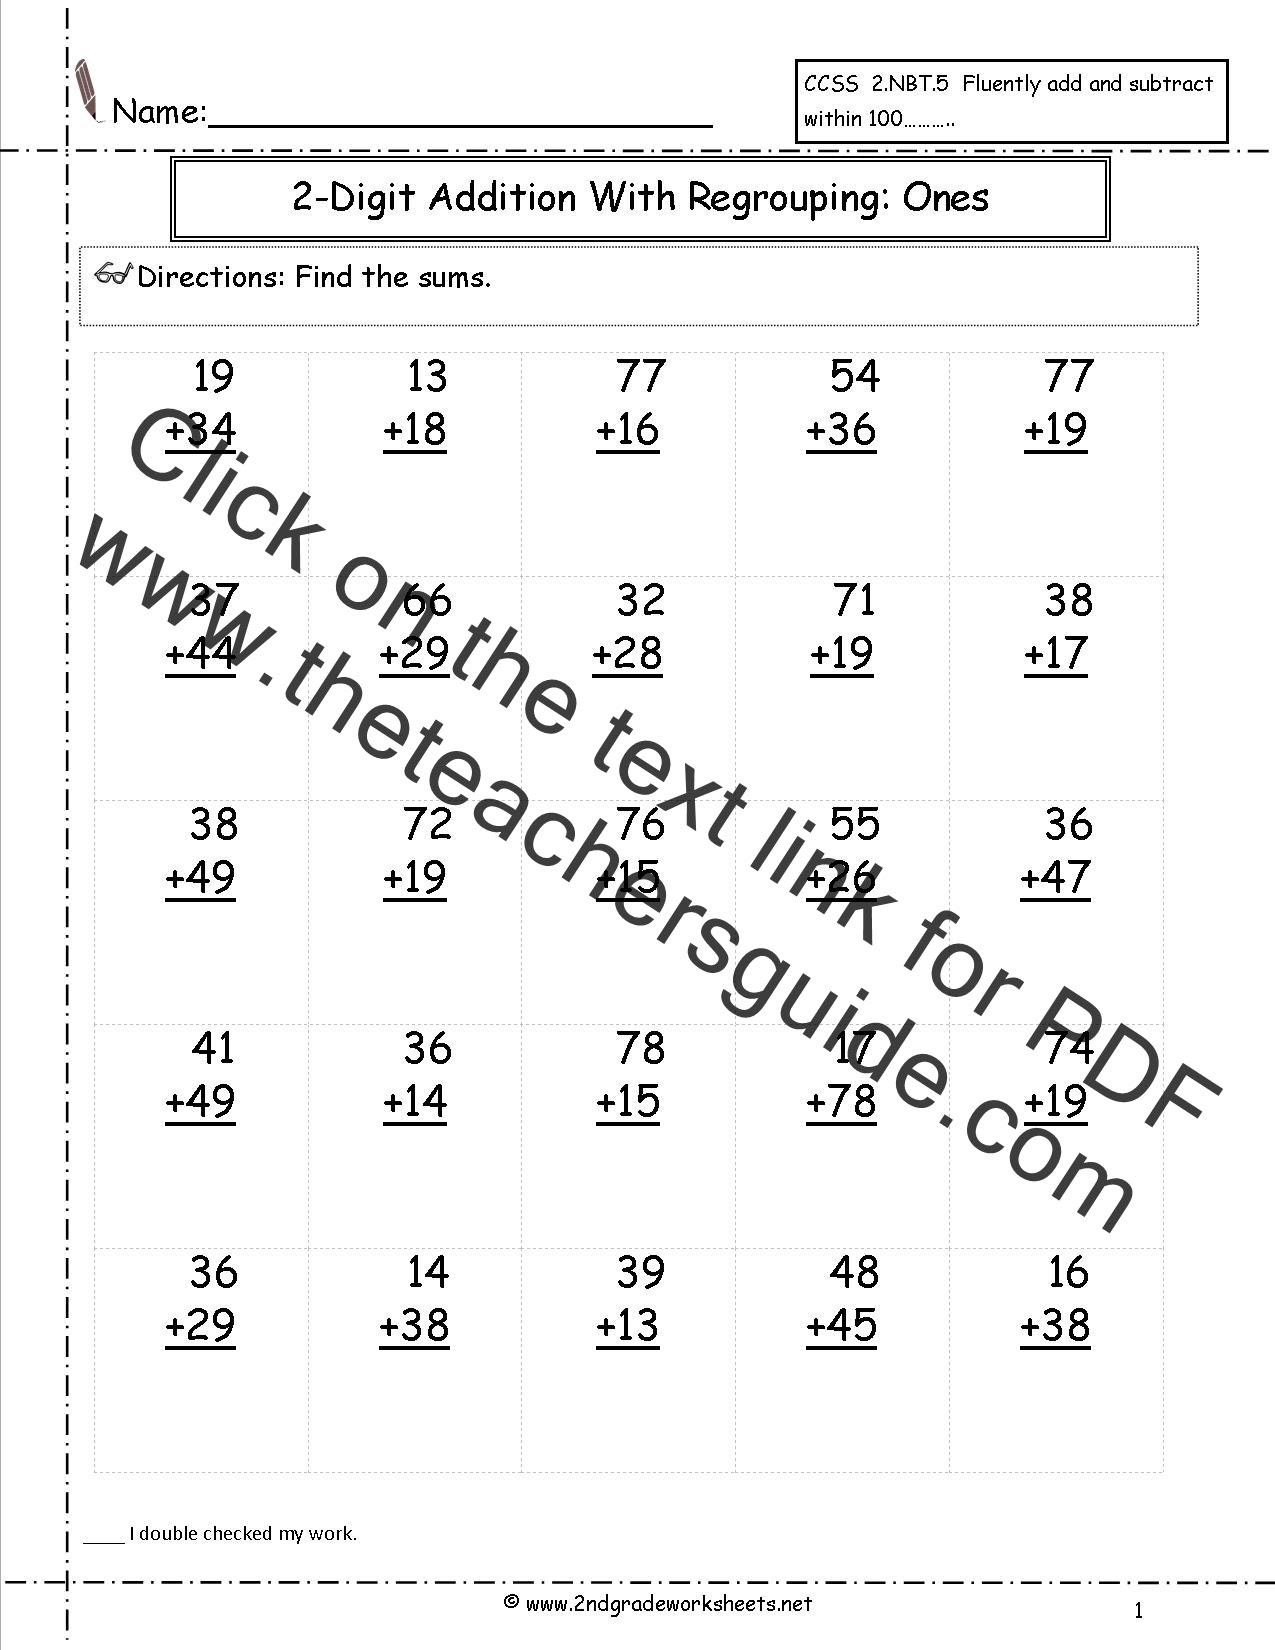 2-digit-addition-with-regrouping-pdf-two-digit-addition-worksheets